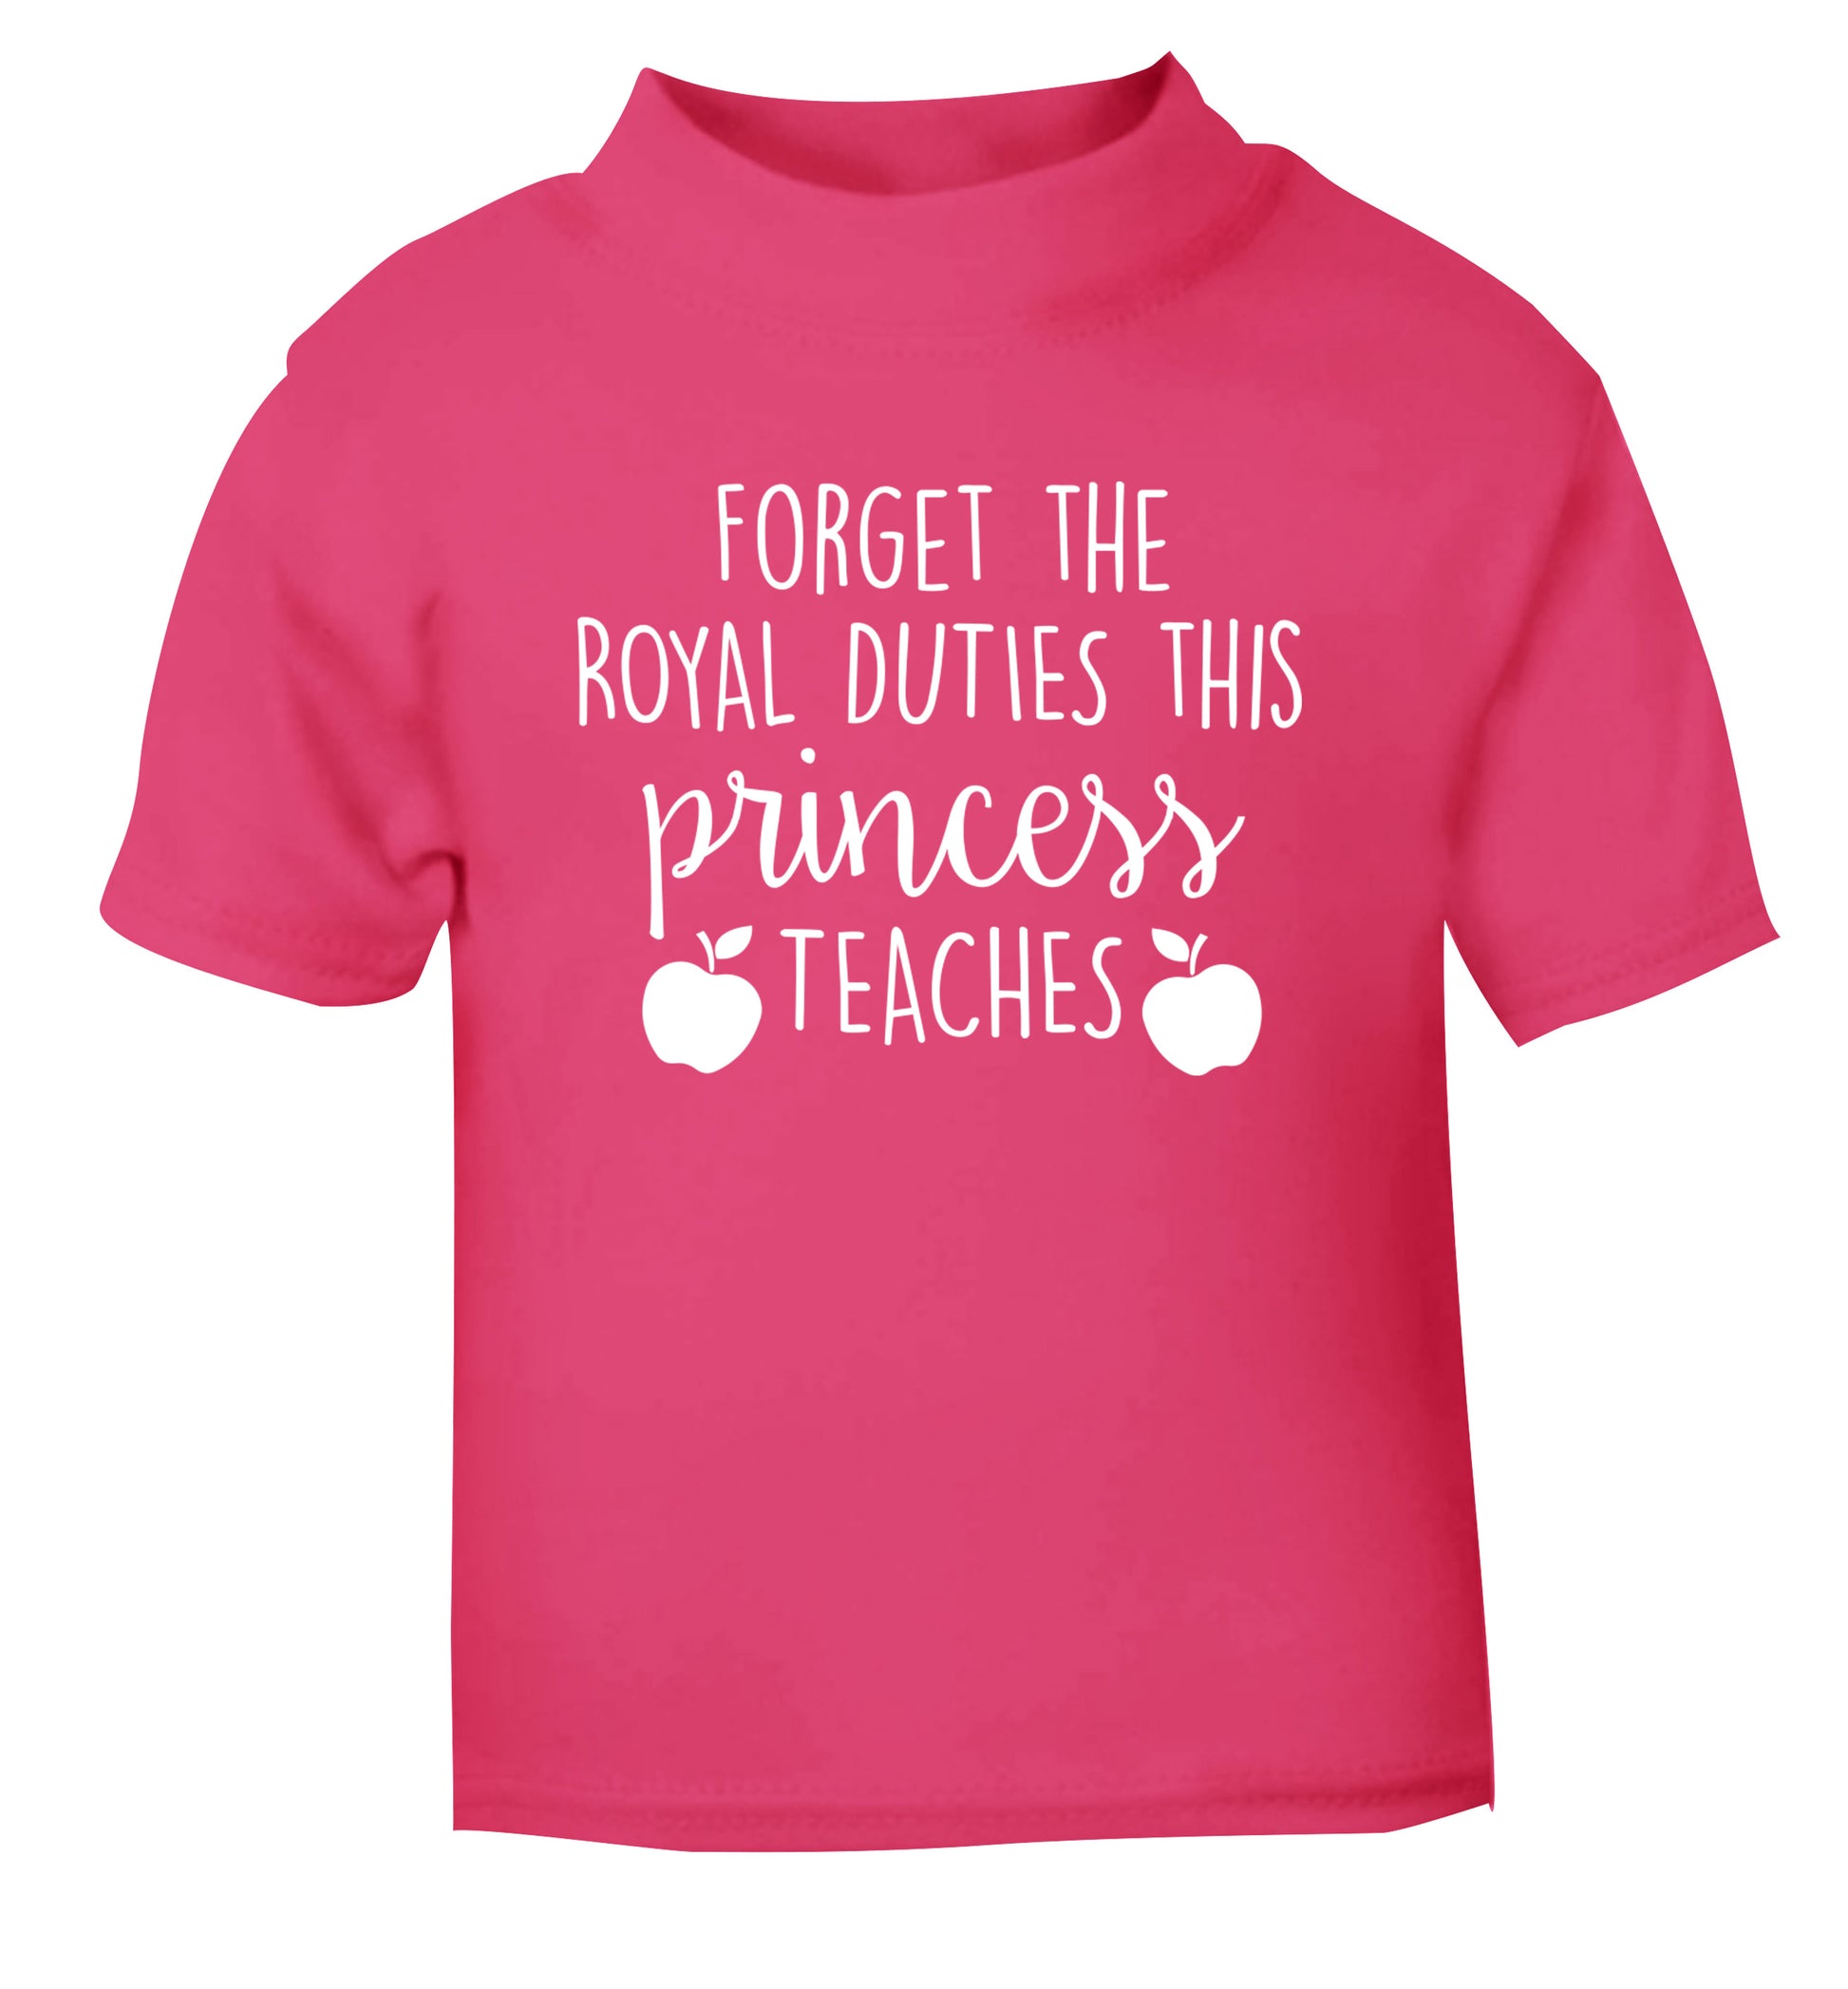 Forget the royal duties this princess teaches pink Baby Toddler Tshirt 2 Years